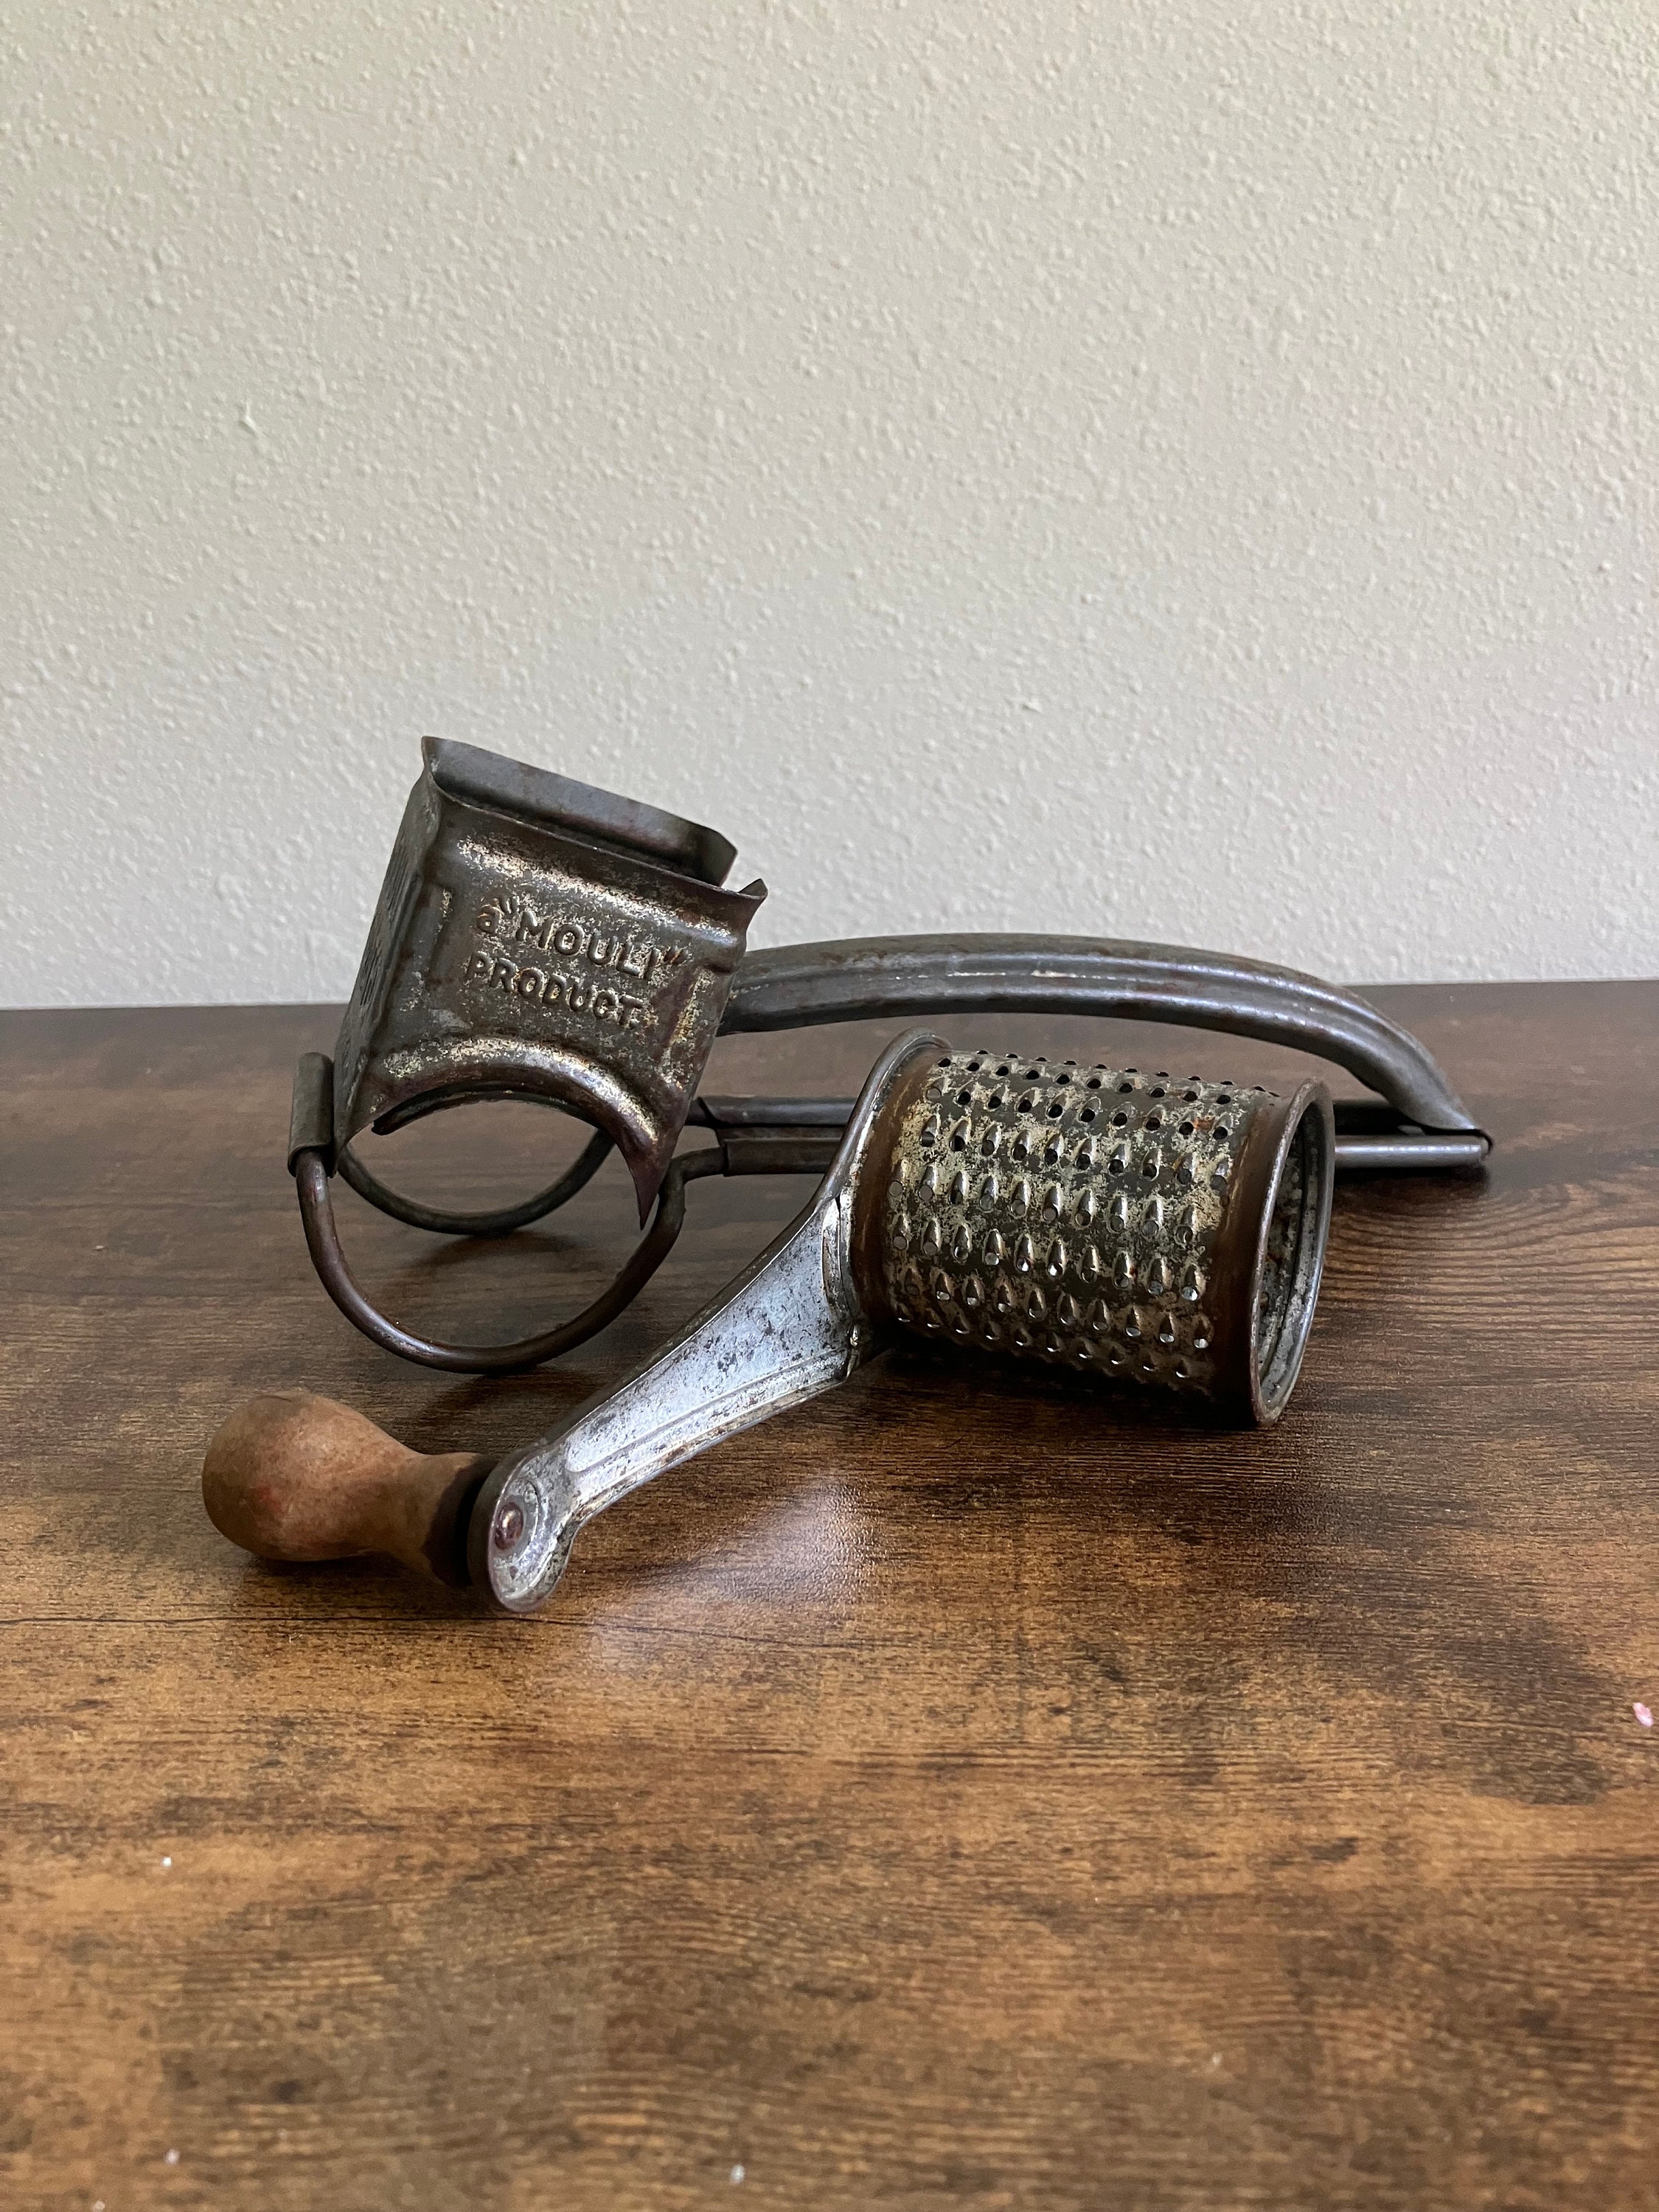 Vintage Rotary Cheese Grater Parmesan Chz Hand Crank WORKS